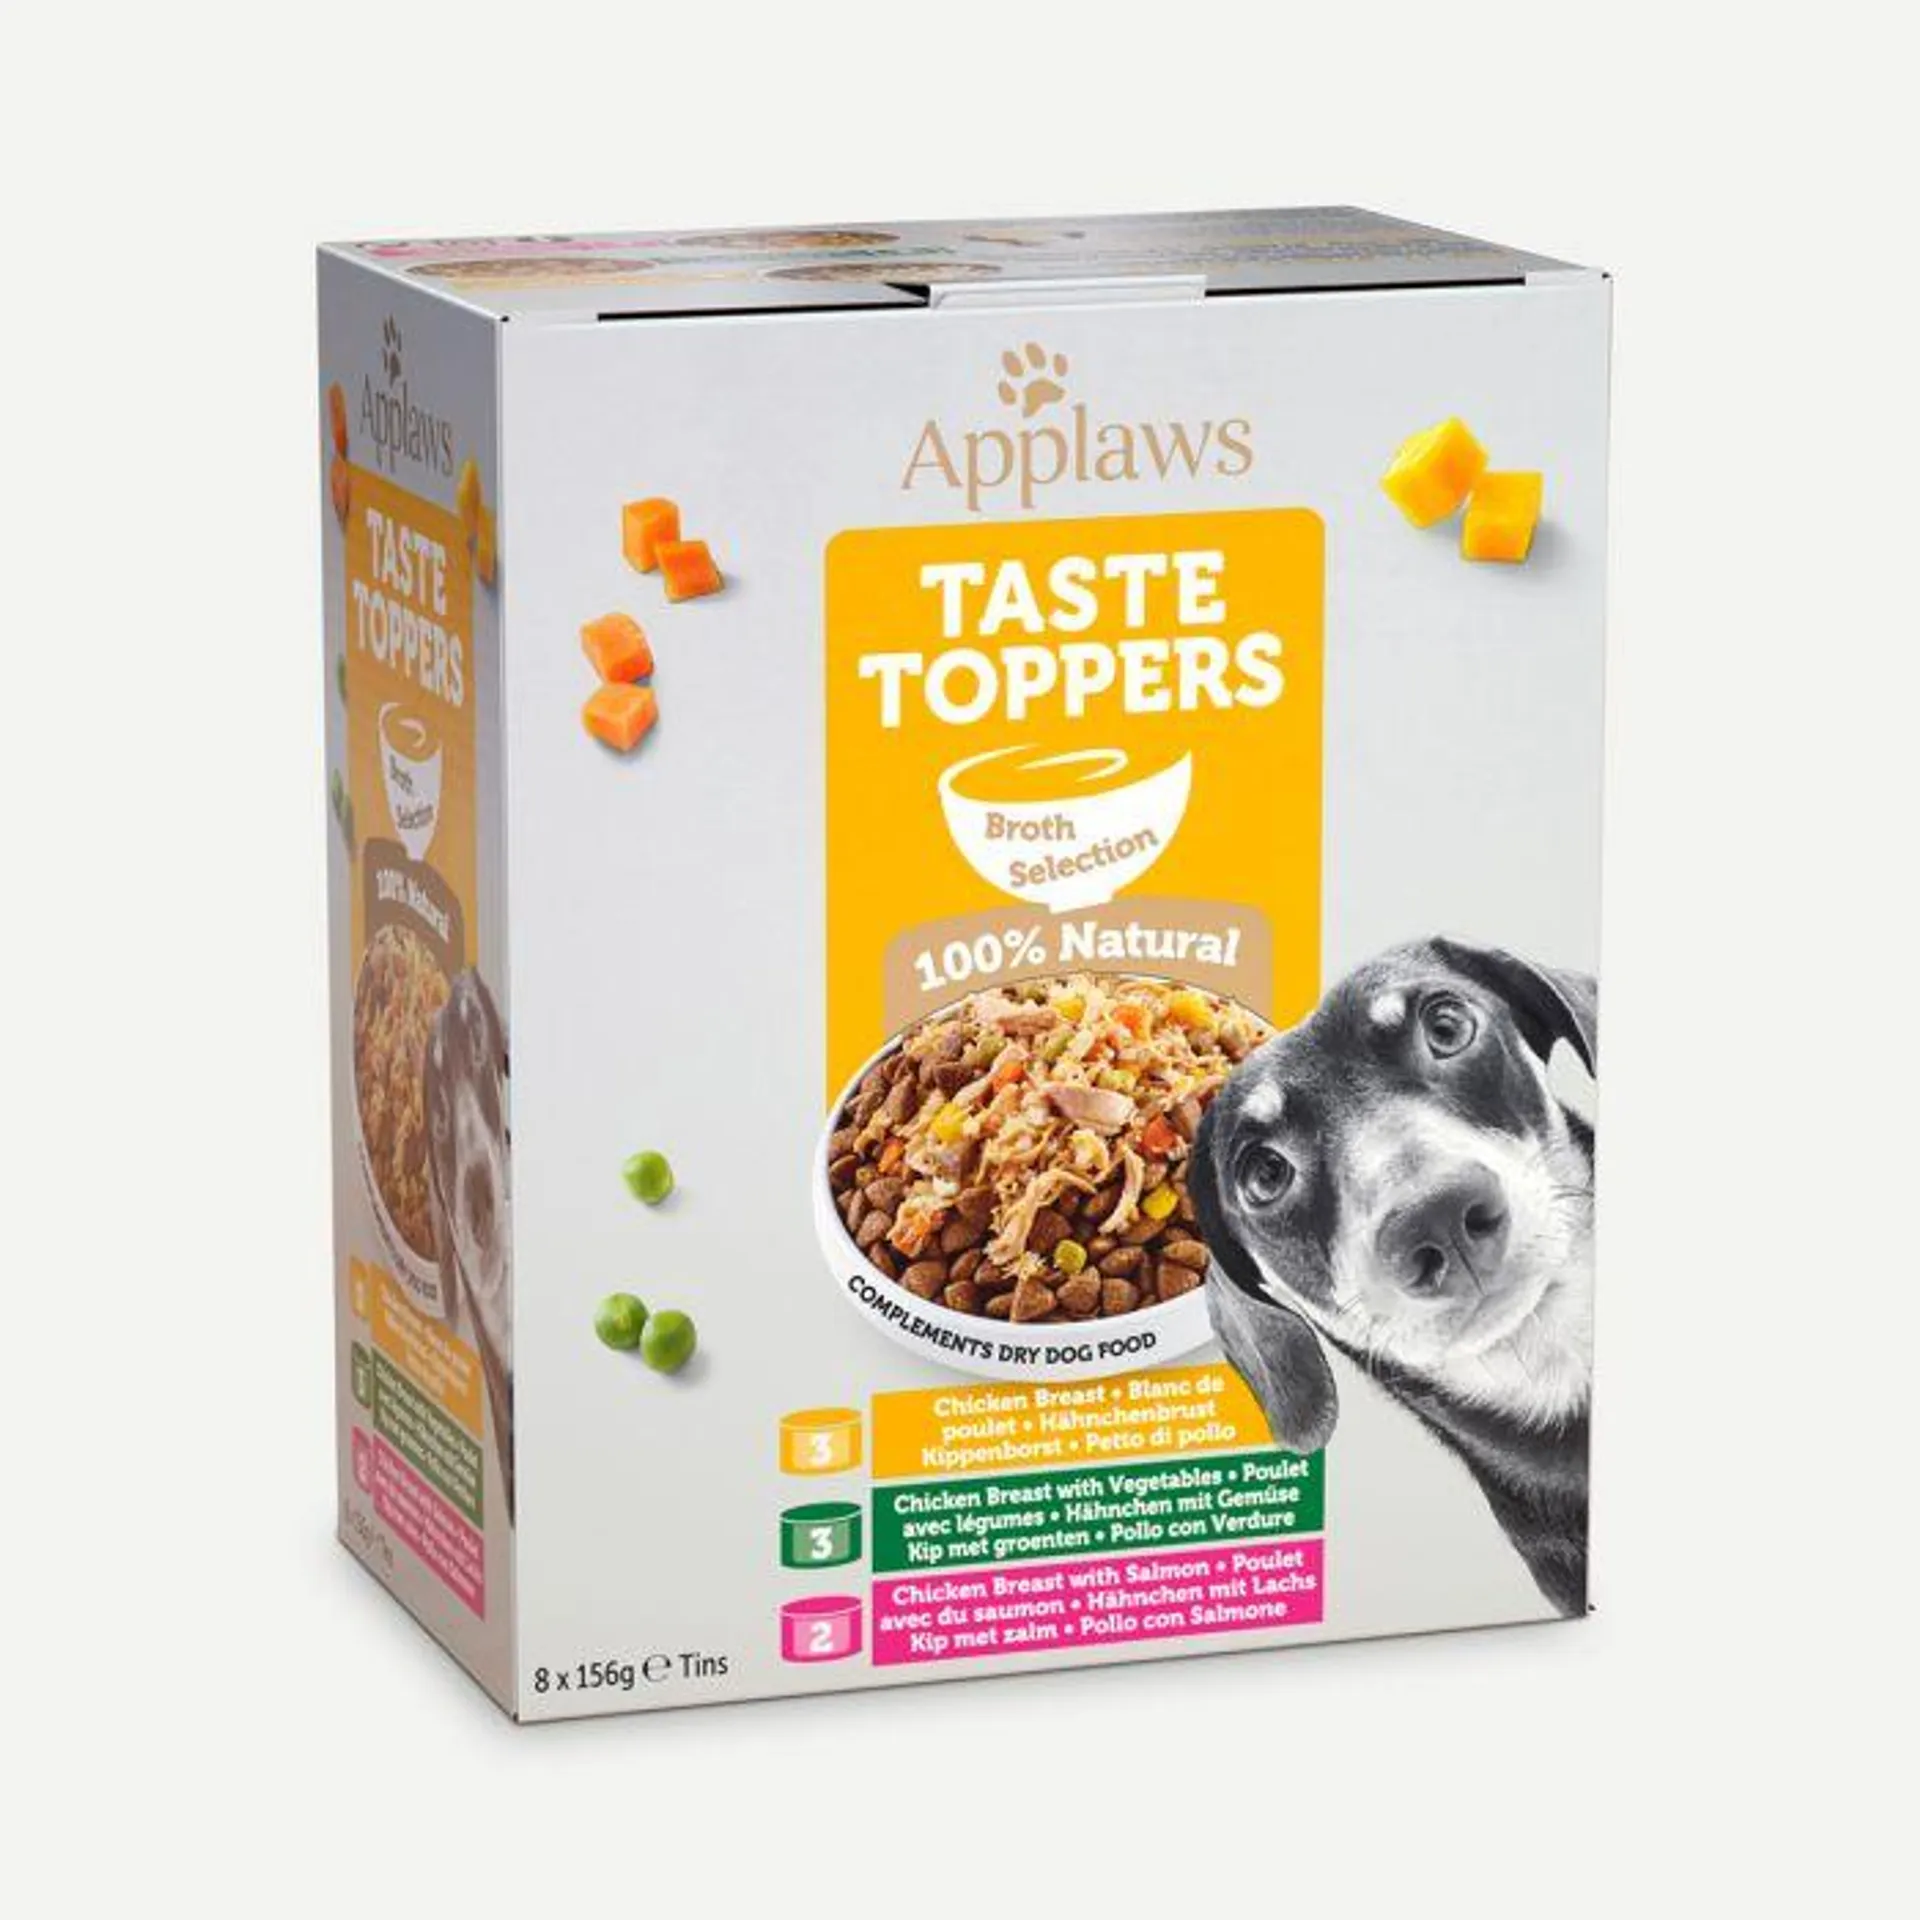 Applaws Taste Toppers Broth Selection 8 X 156G Tins